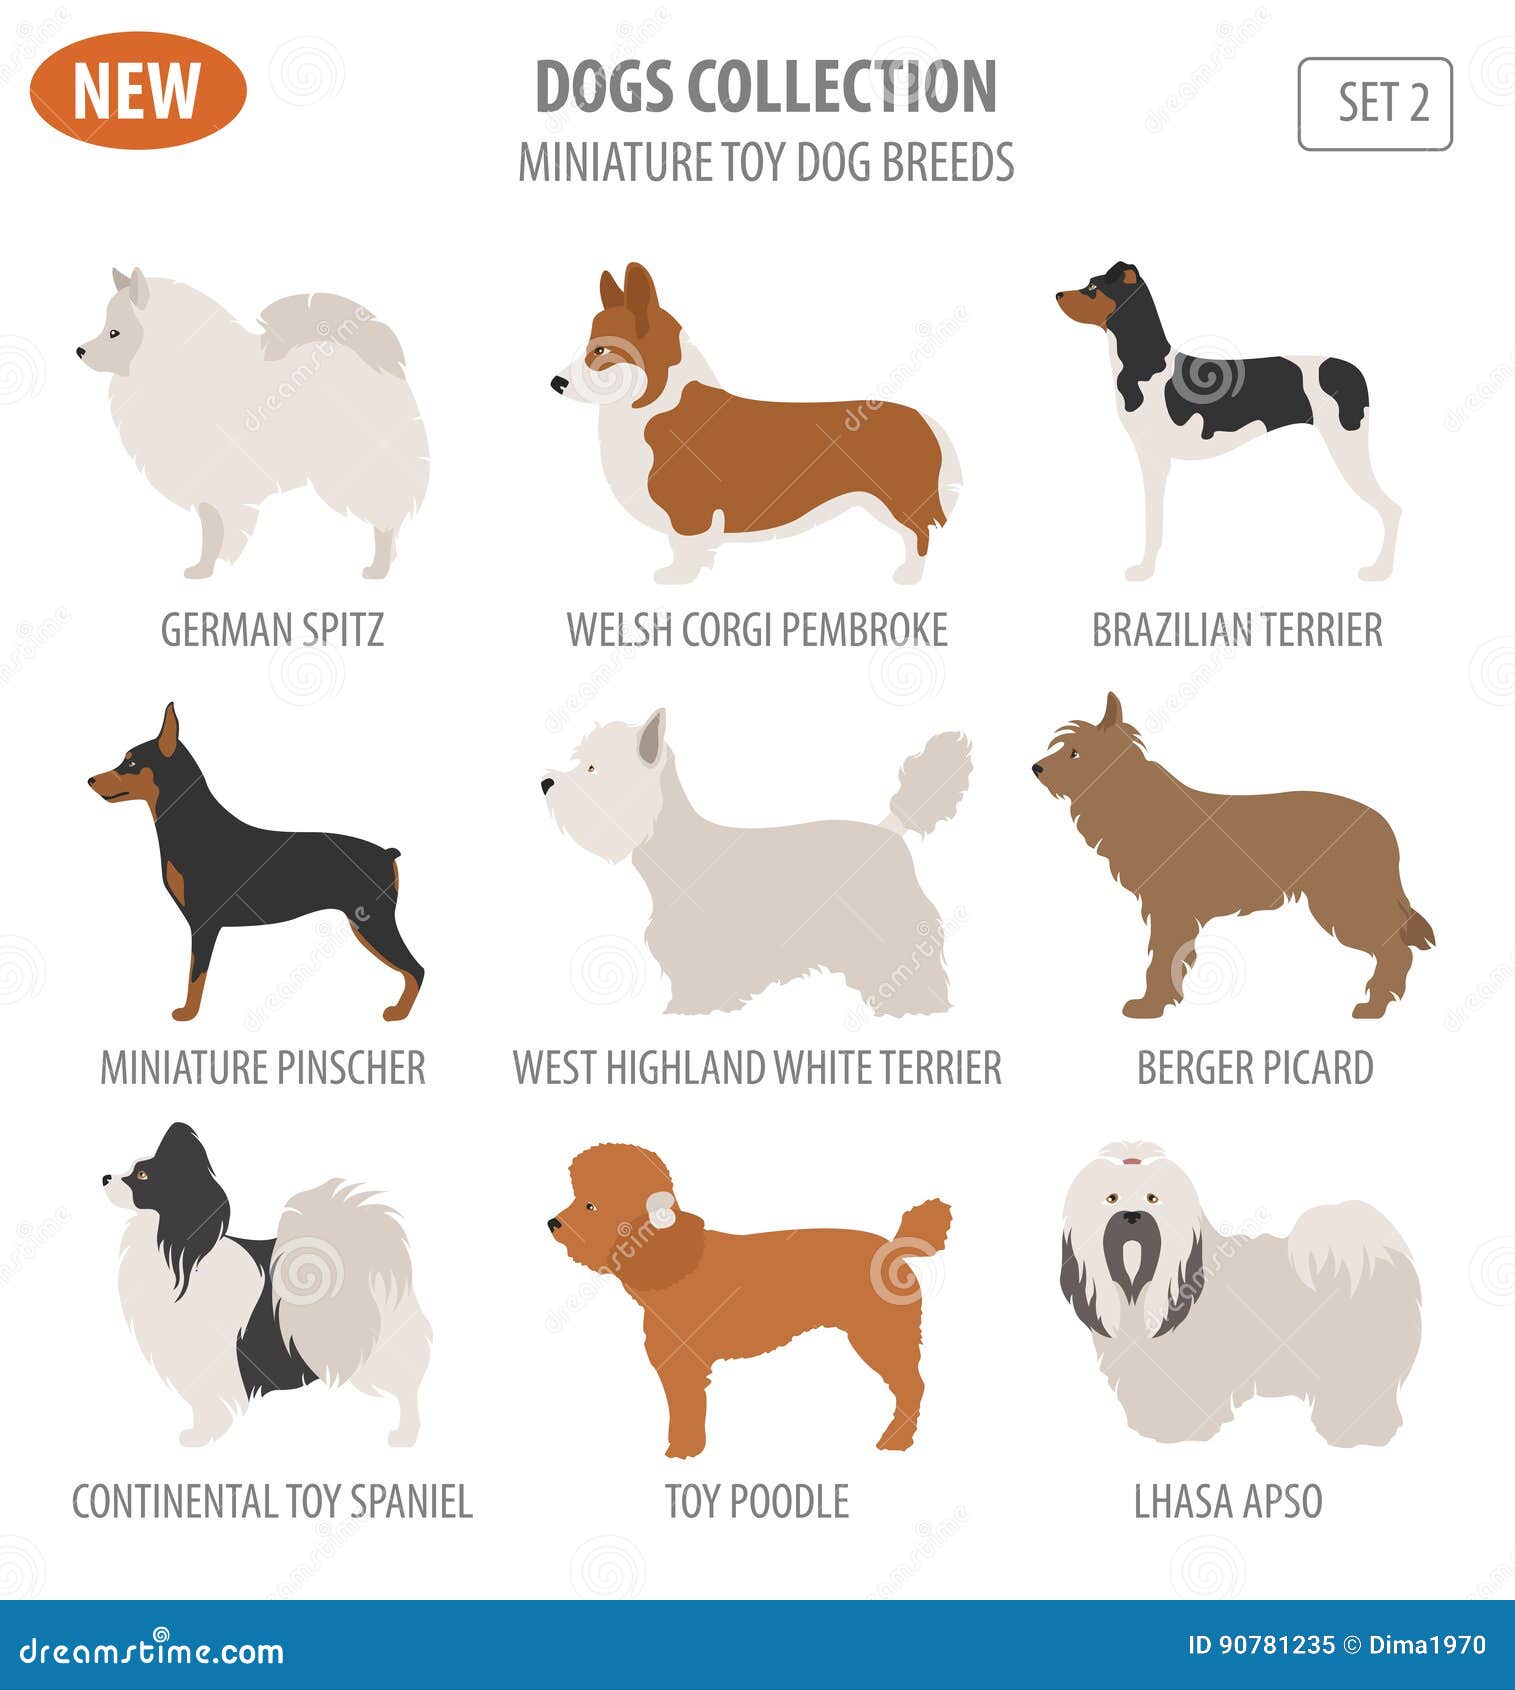 Premium Vector  Dog breeds set, small and medium size, side view